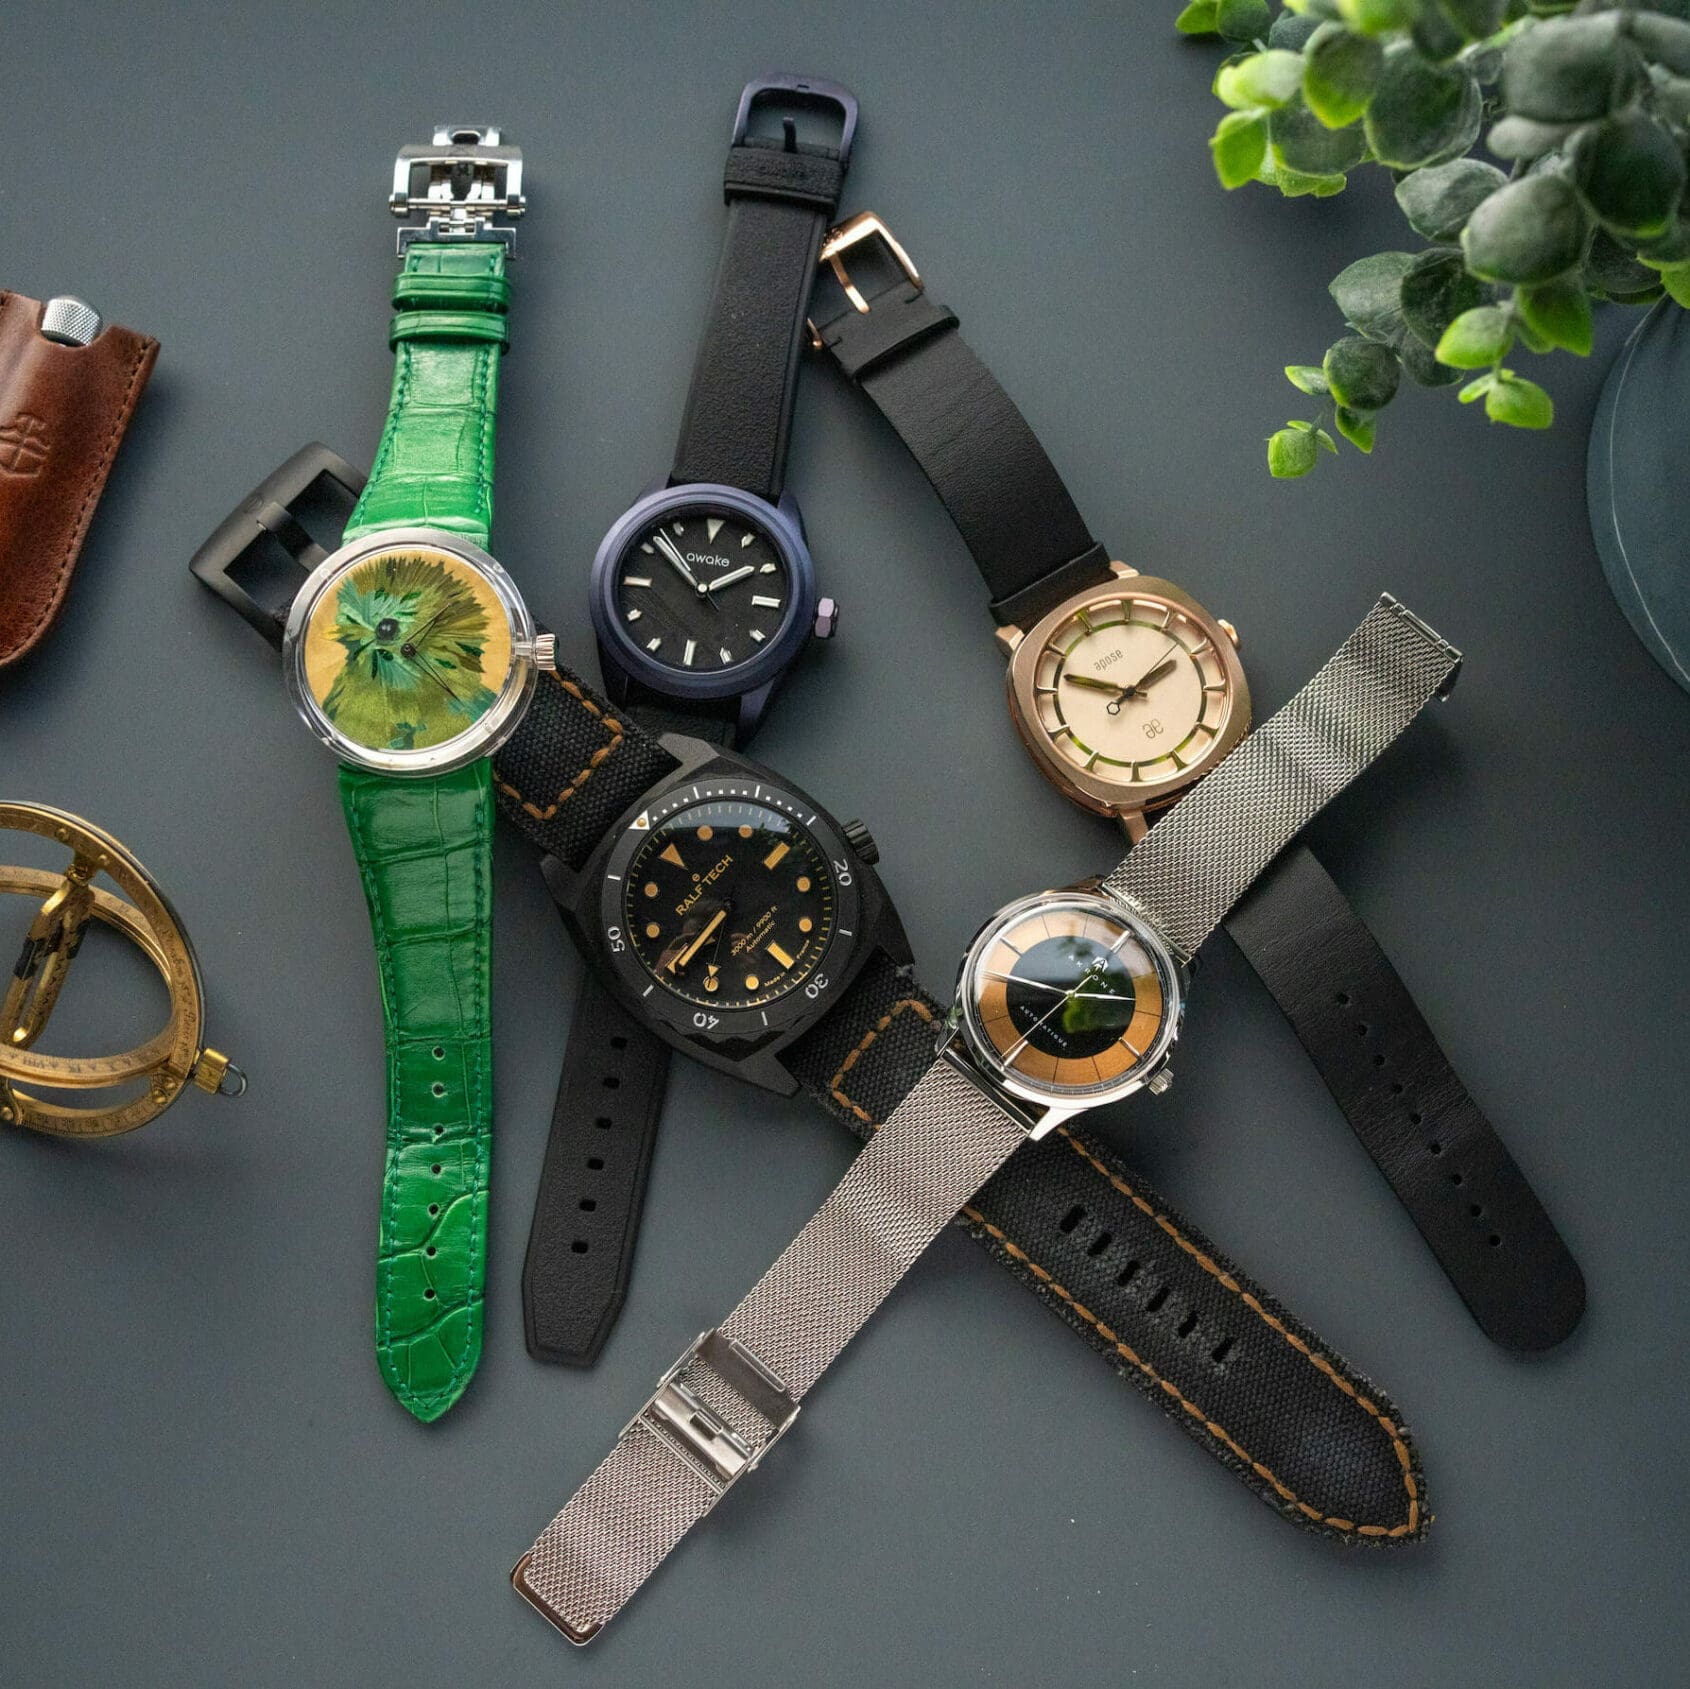 11 of the best affordable watches that are still seriously cool